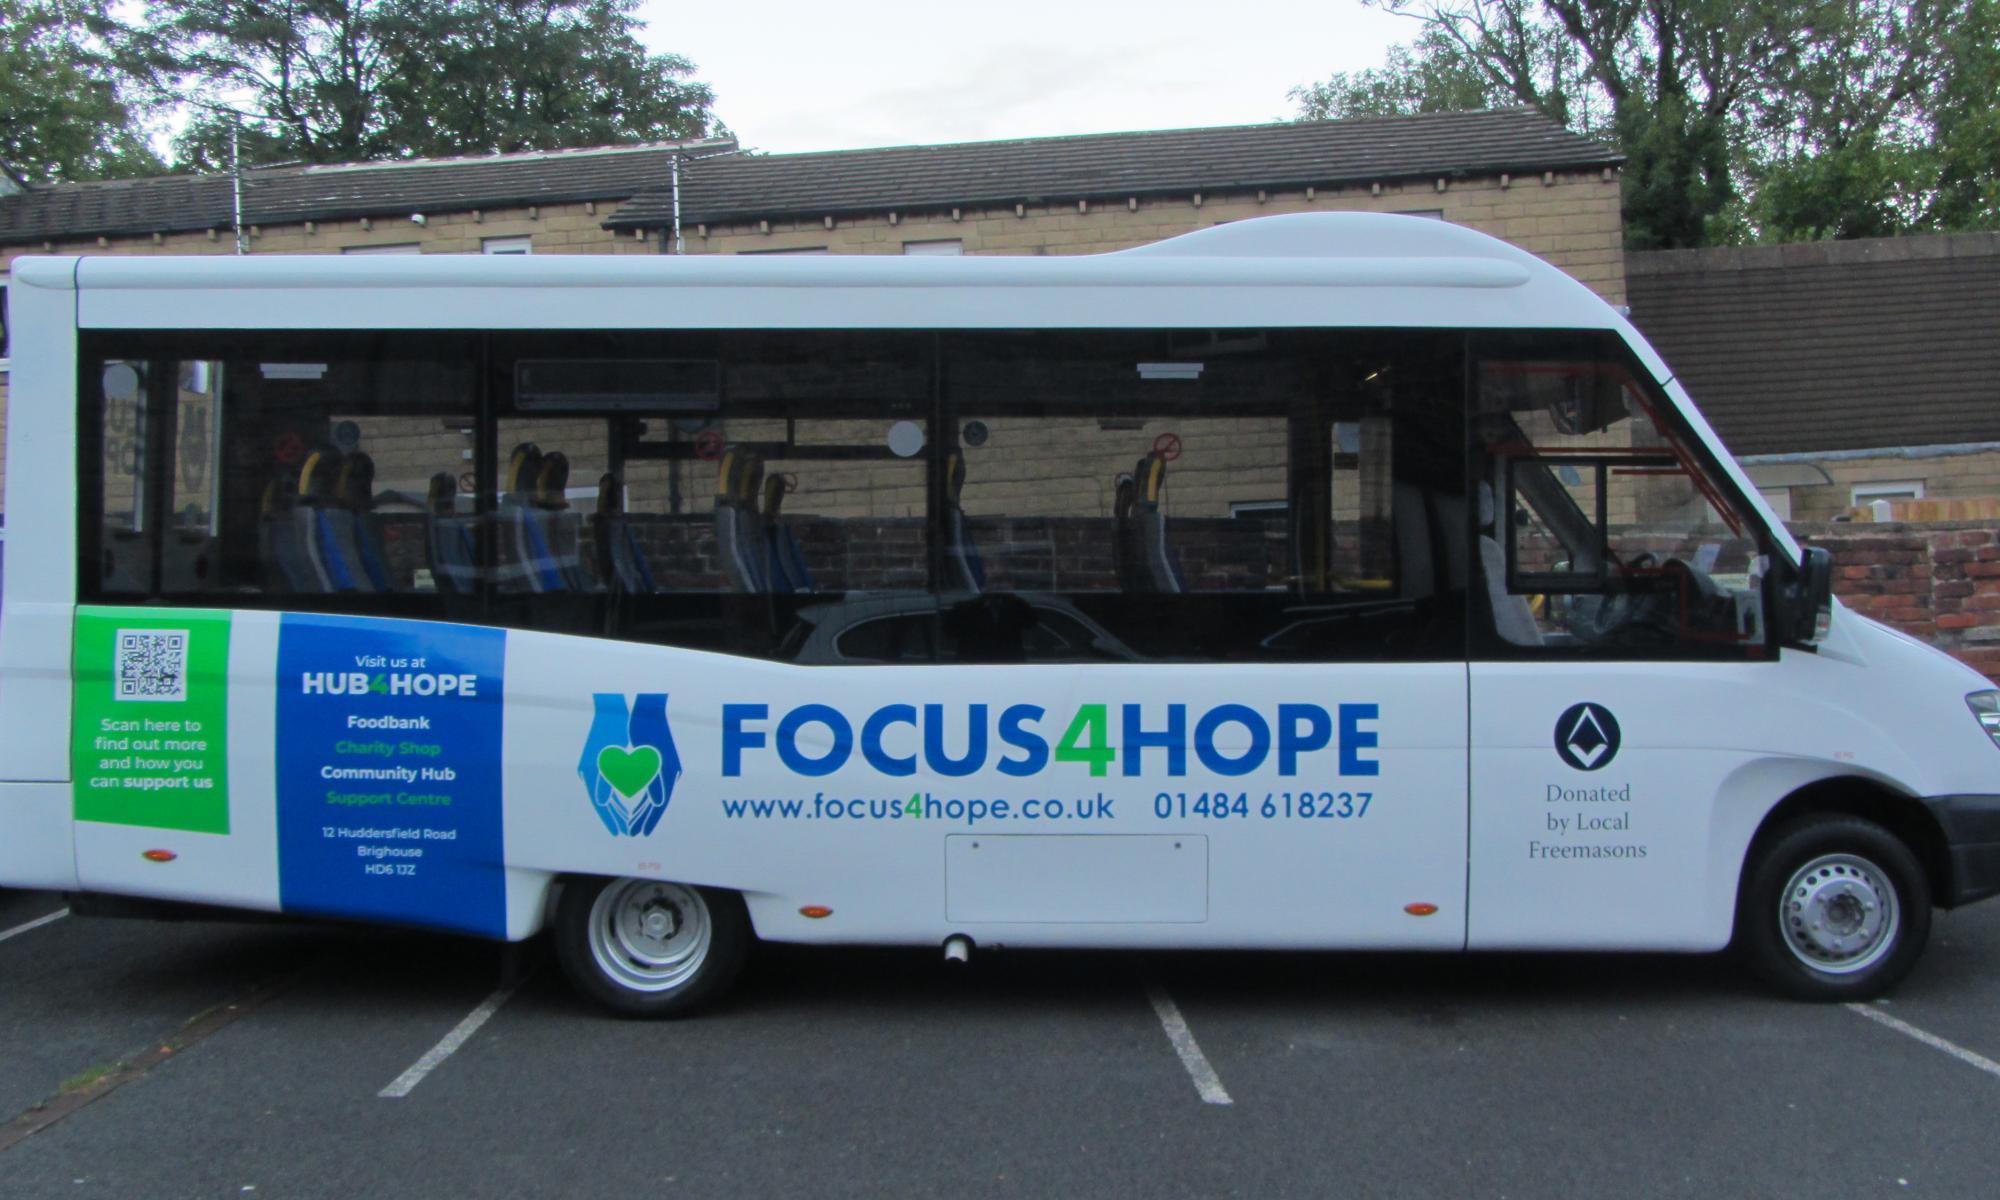 Focus4Hope's new 16-seat minibus, which with blue and green decals.